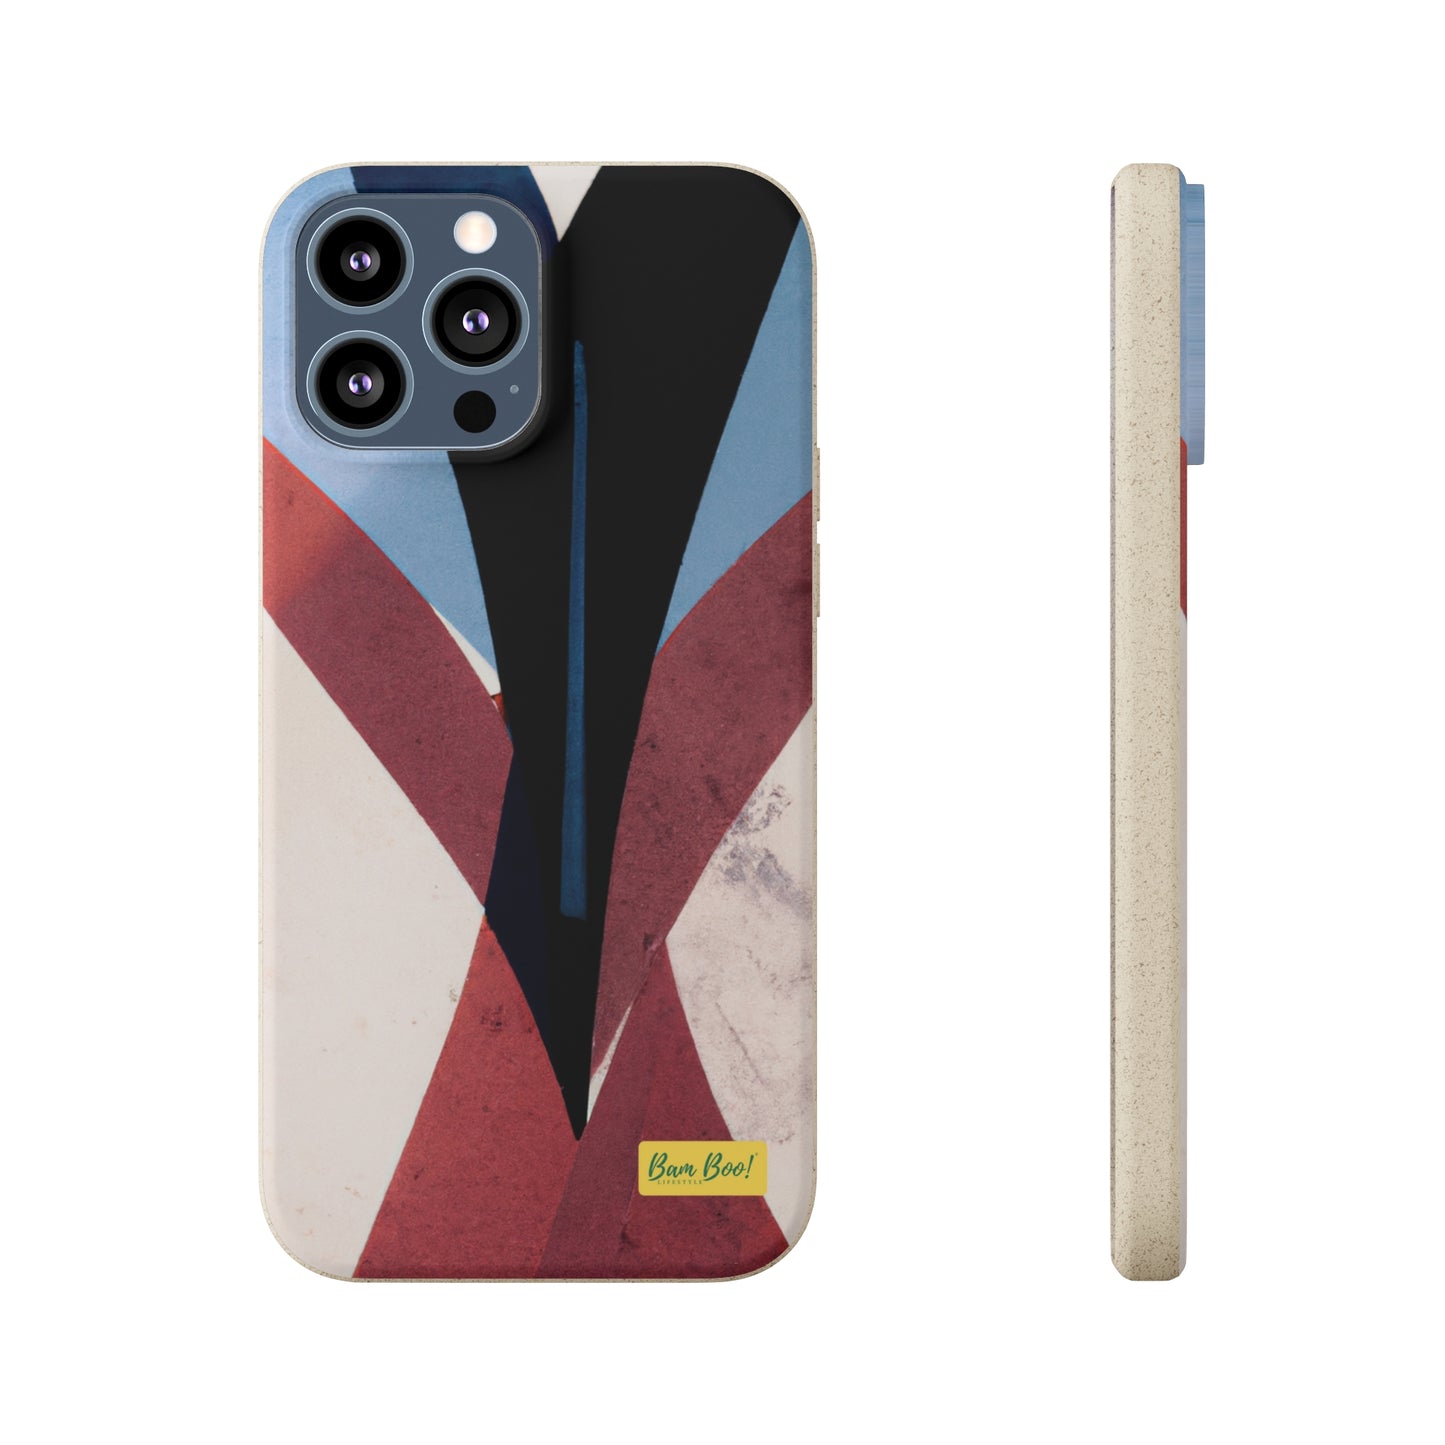 "The Artistry of Emotional Expressions" - Bam Boo! Lifestyle Eco-friendly Cases